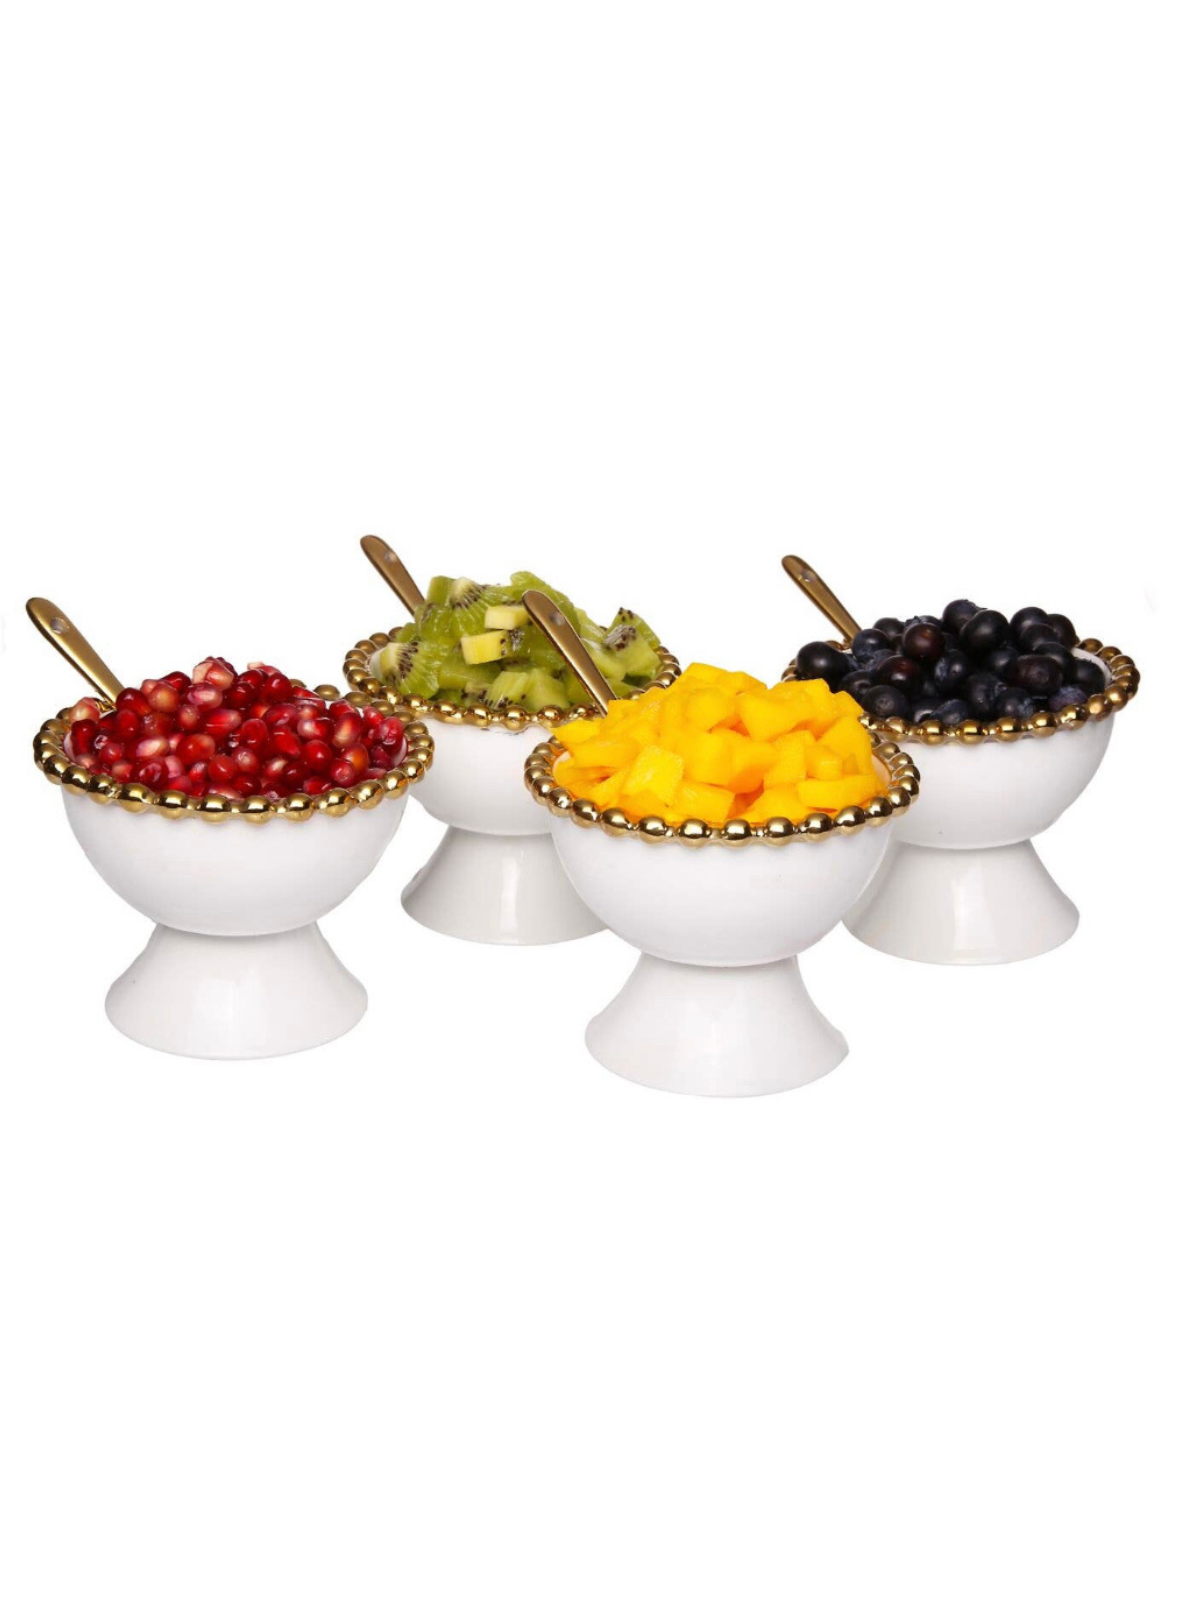 Situated on a stand, these gold edged dessert bowls elegantly close a meal. Its pure white color makes it the ideal dish to fill with colored berries and melons for a charming Completion of Feast.